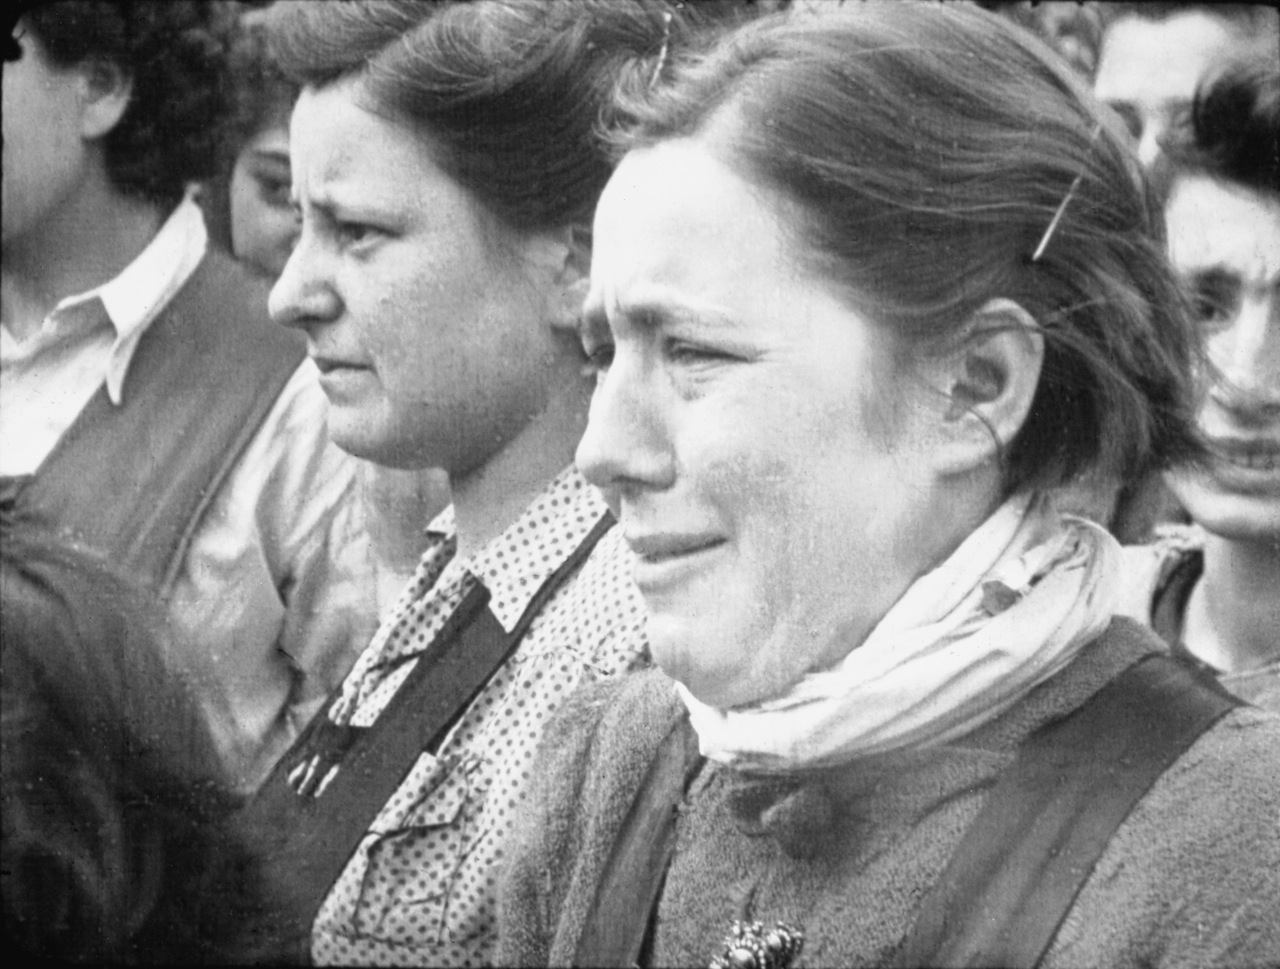 Captioned "Reaction of a Girl," a distressed young woman watches a burial at Bergen-Belsen. From footage shot by Sergeant  Lewis, April 17, 1945. 